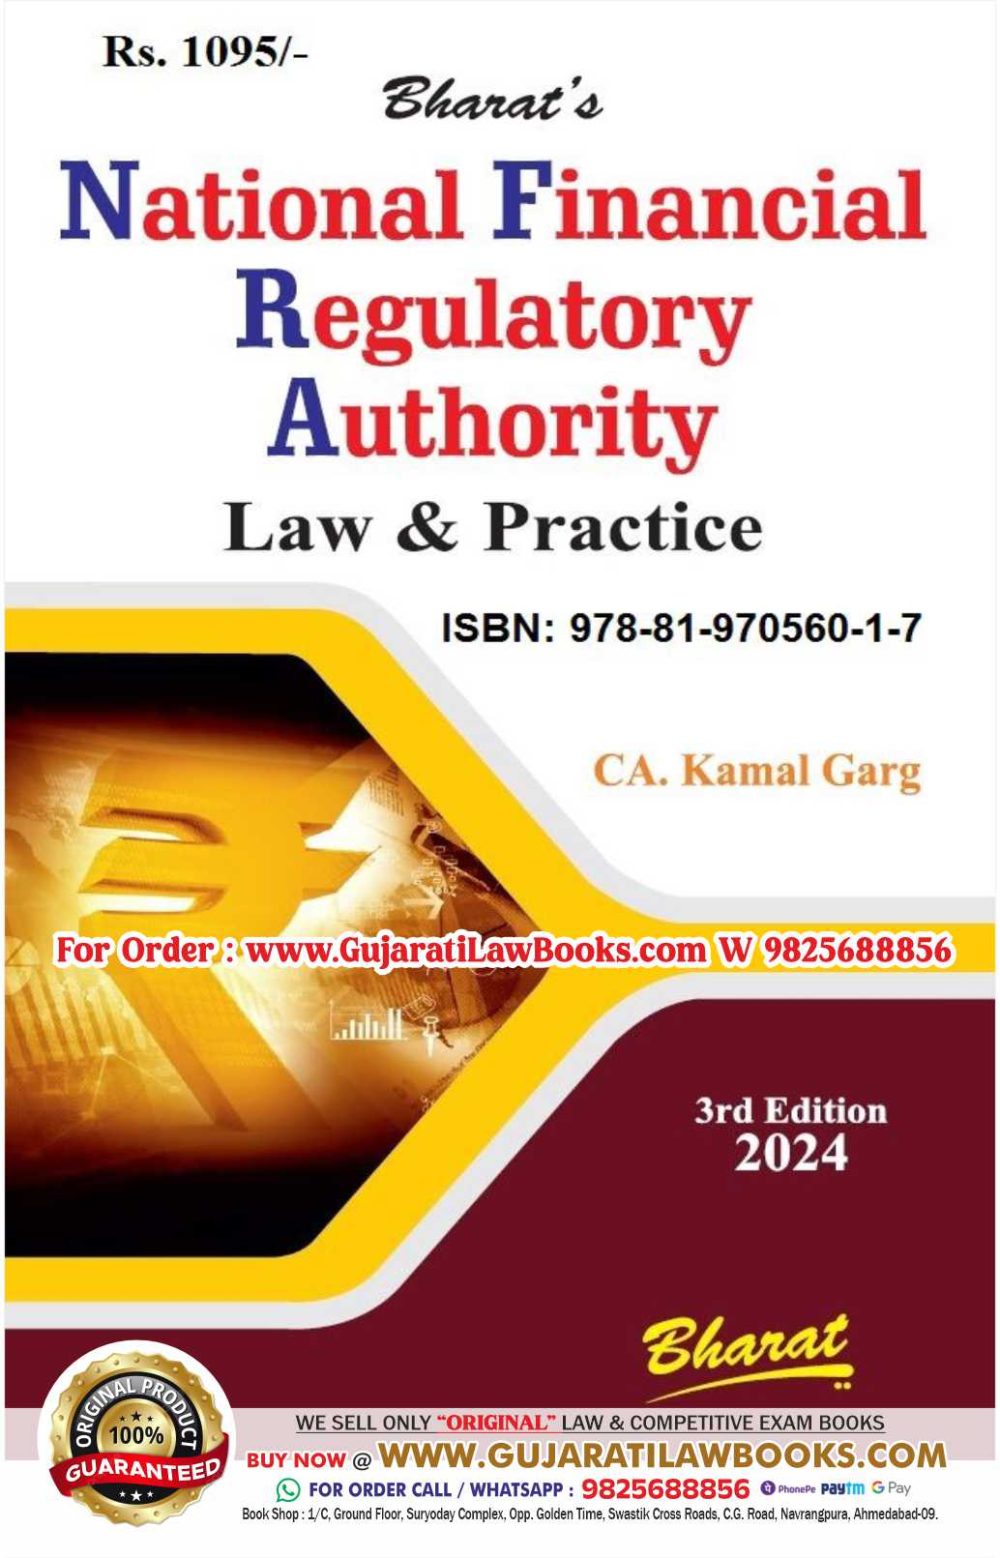 Bharat's NFRA - NATIONAL FINANCIAL REGULATORY AUTHORITY Law & Practice by CA Kamal Garg - Latest 3rd Edition 2024